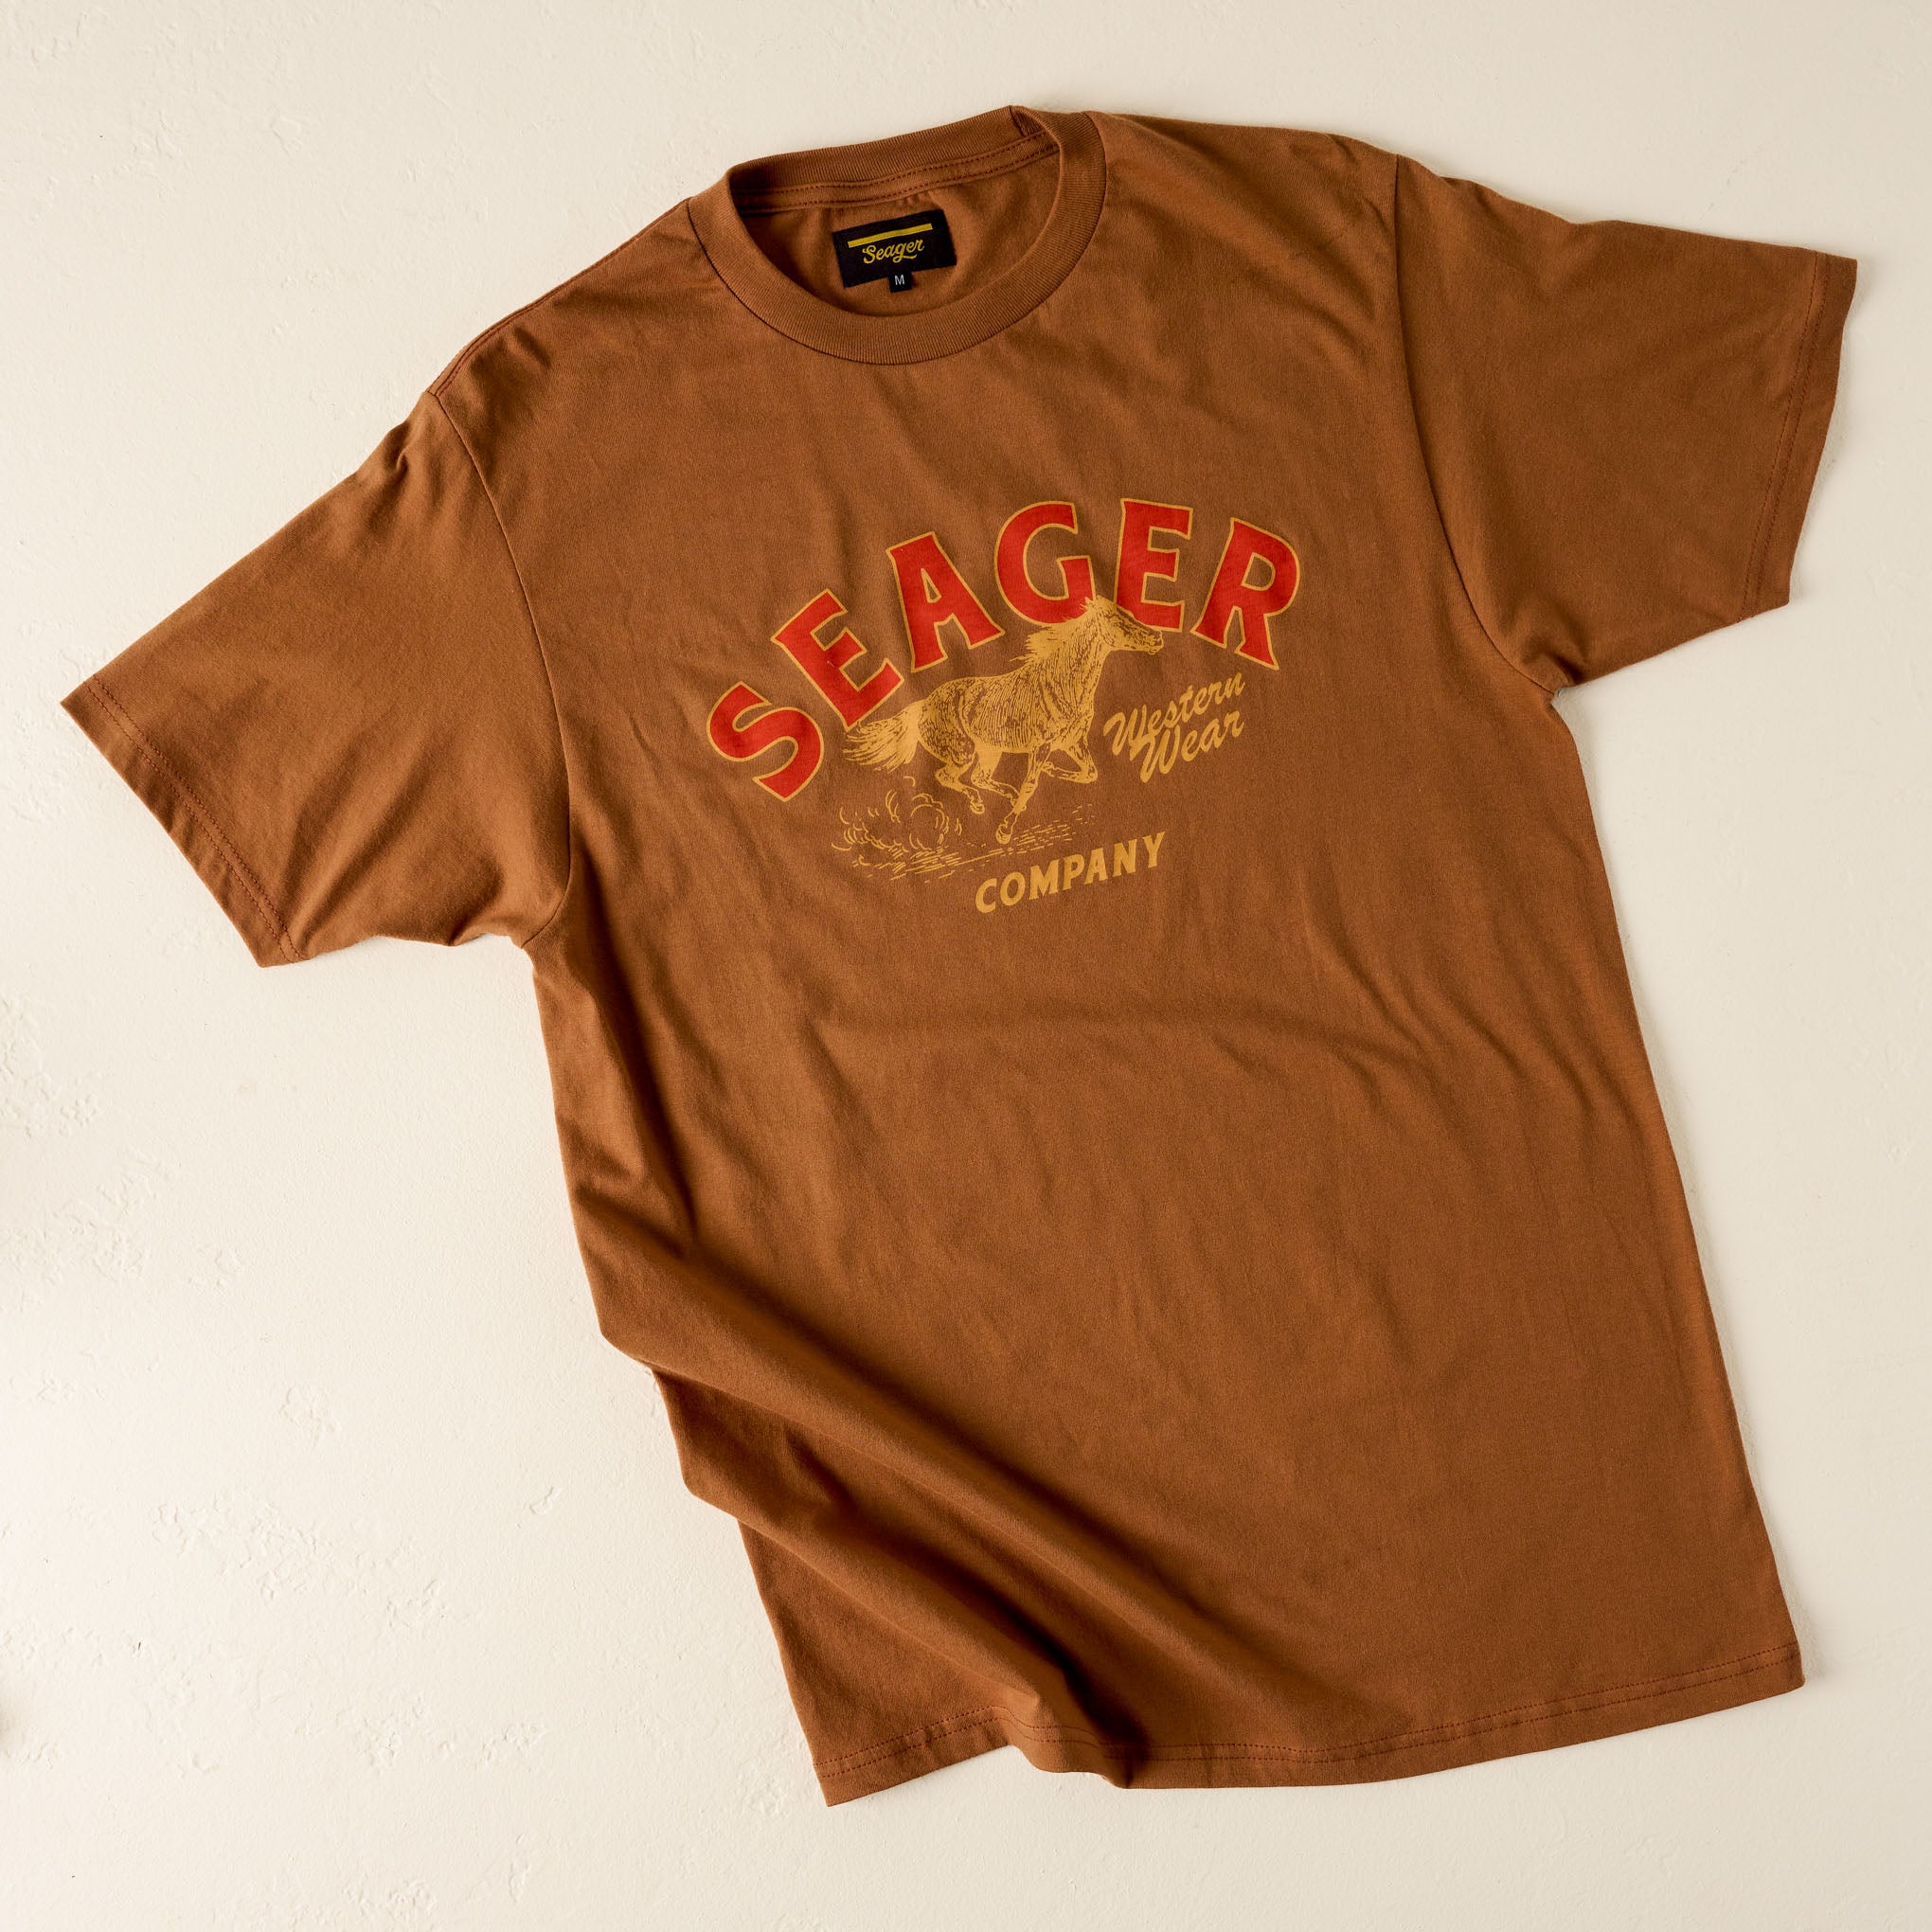 Seager Heritage Tee $35.00